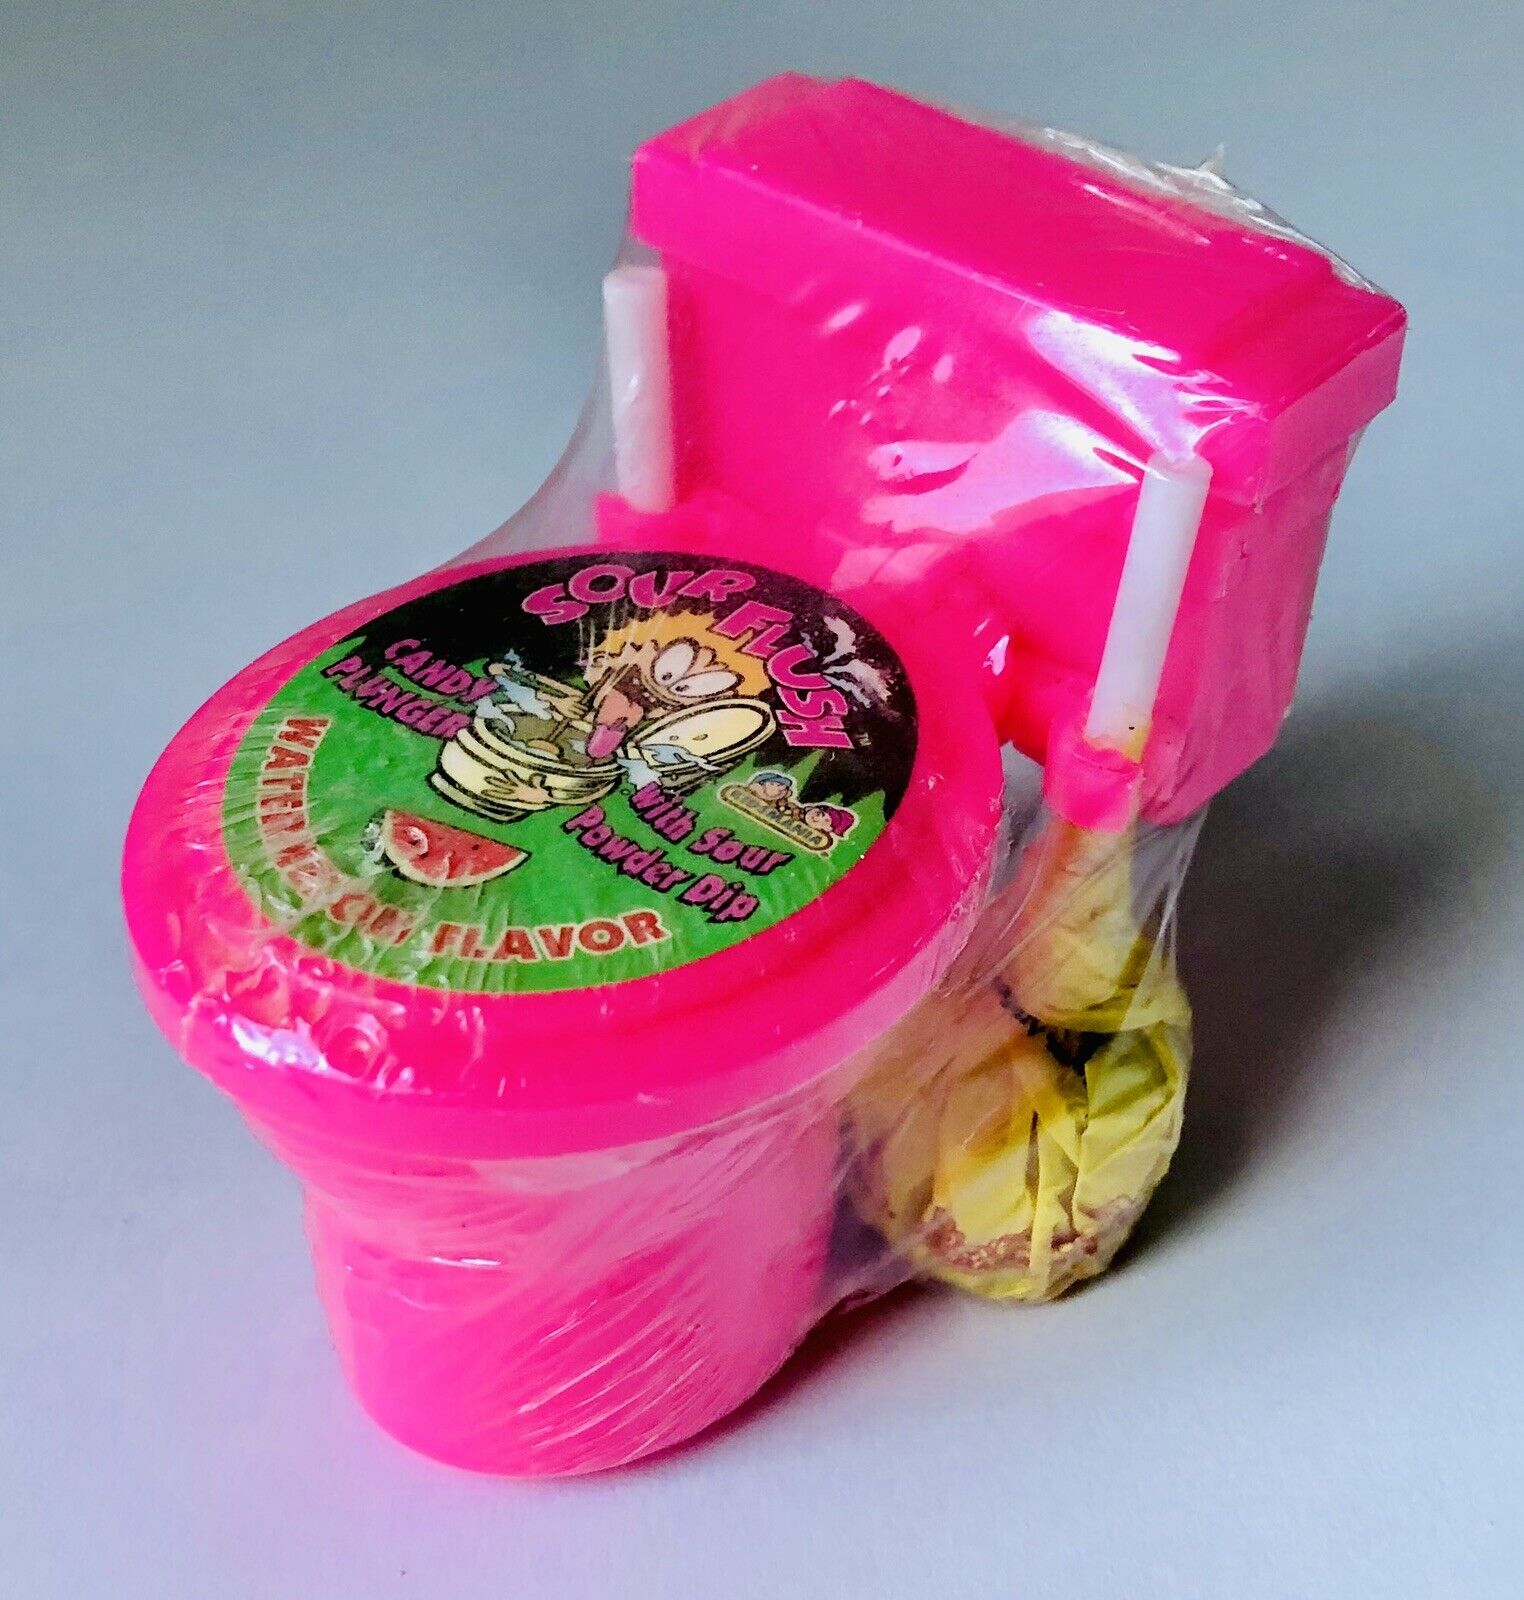 Vintage 2002 Kidsmania SOUR FLUSH Toilet HOT PINK Candy Container FIRST EDITION